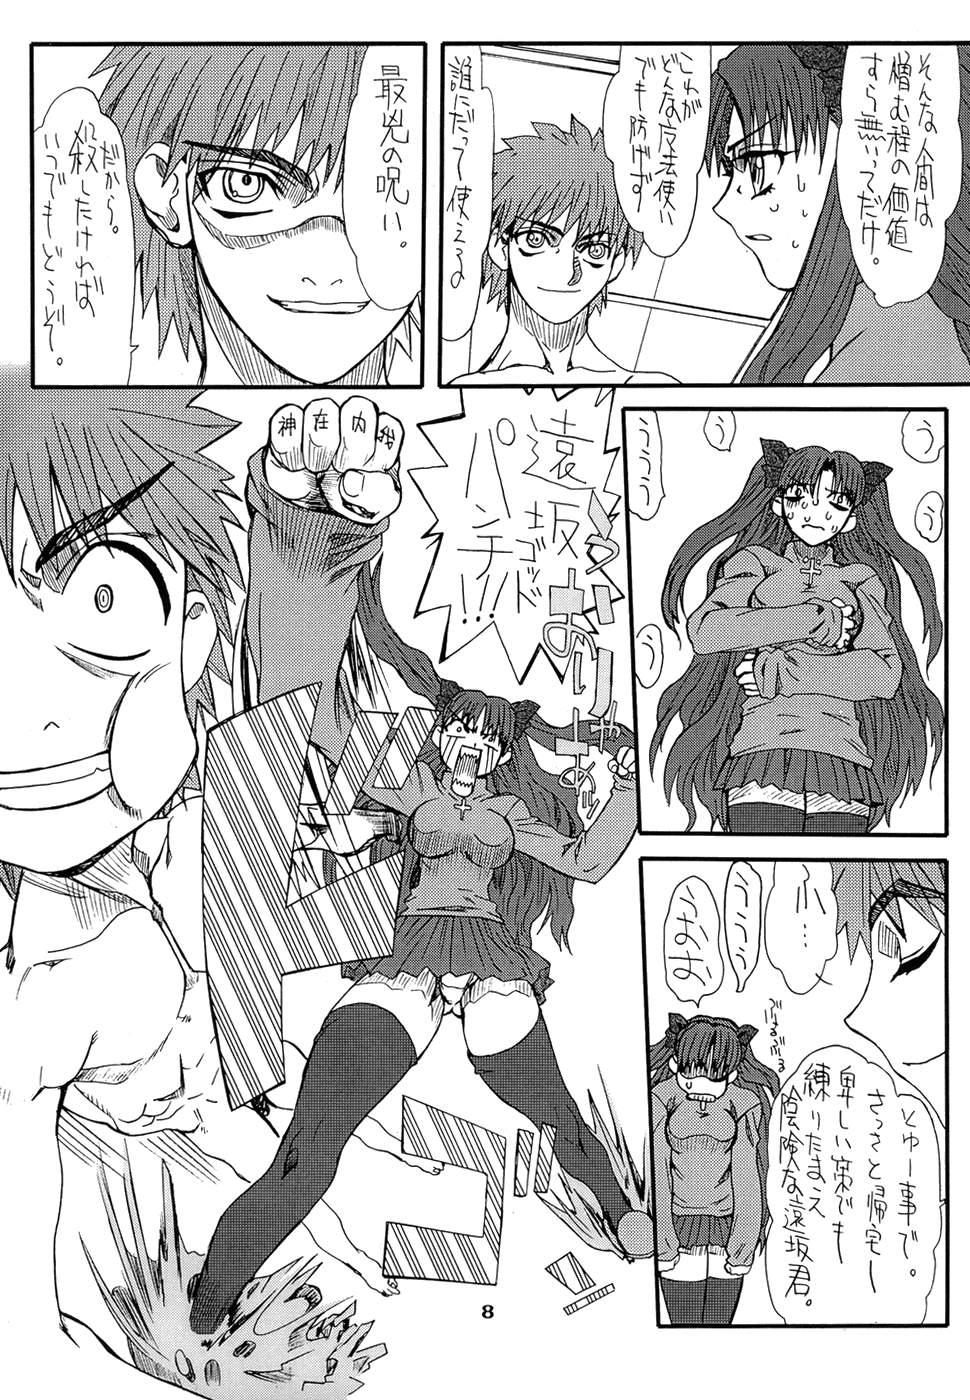 Argentino Akihime San - Fate stay night Wild Amateurs - Page 8